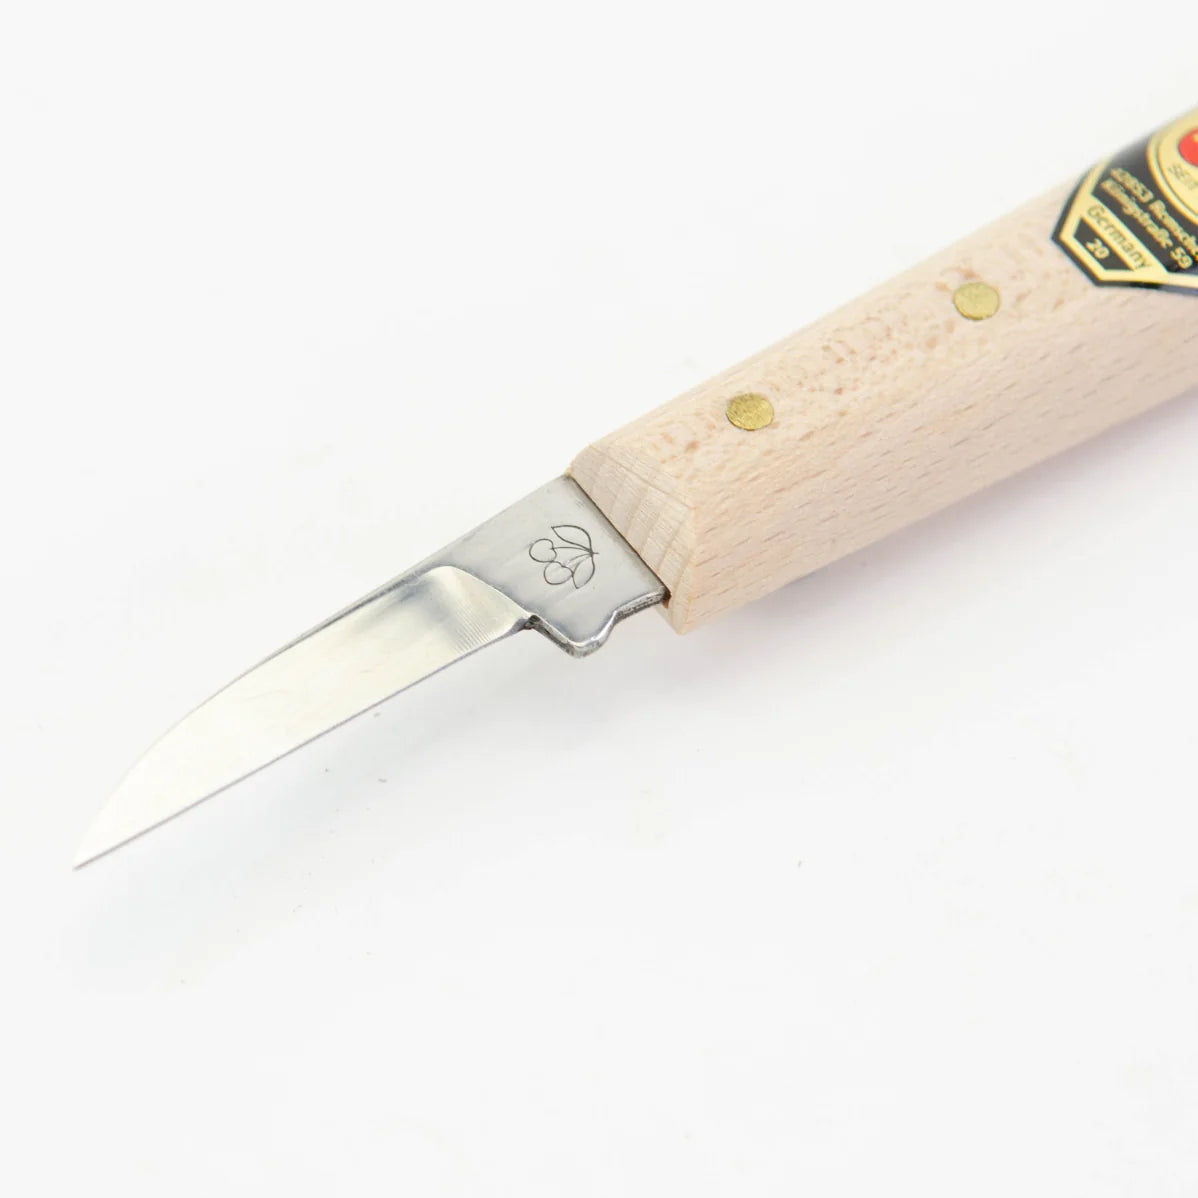 Carving Knife - Woodworking tool